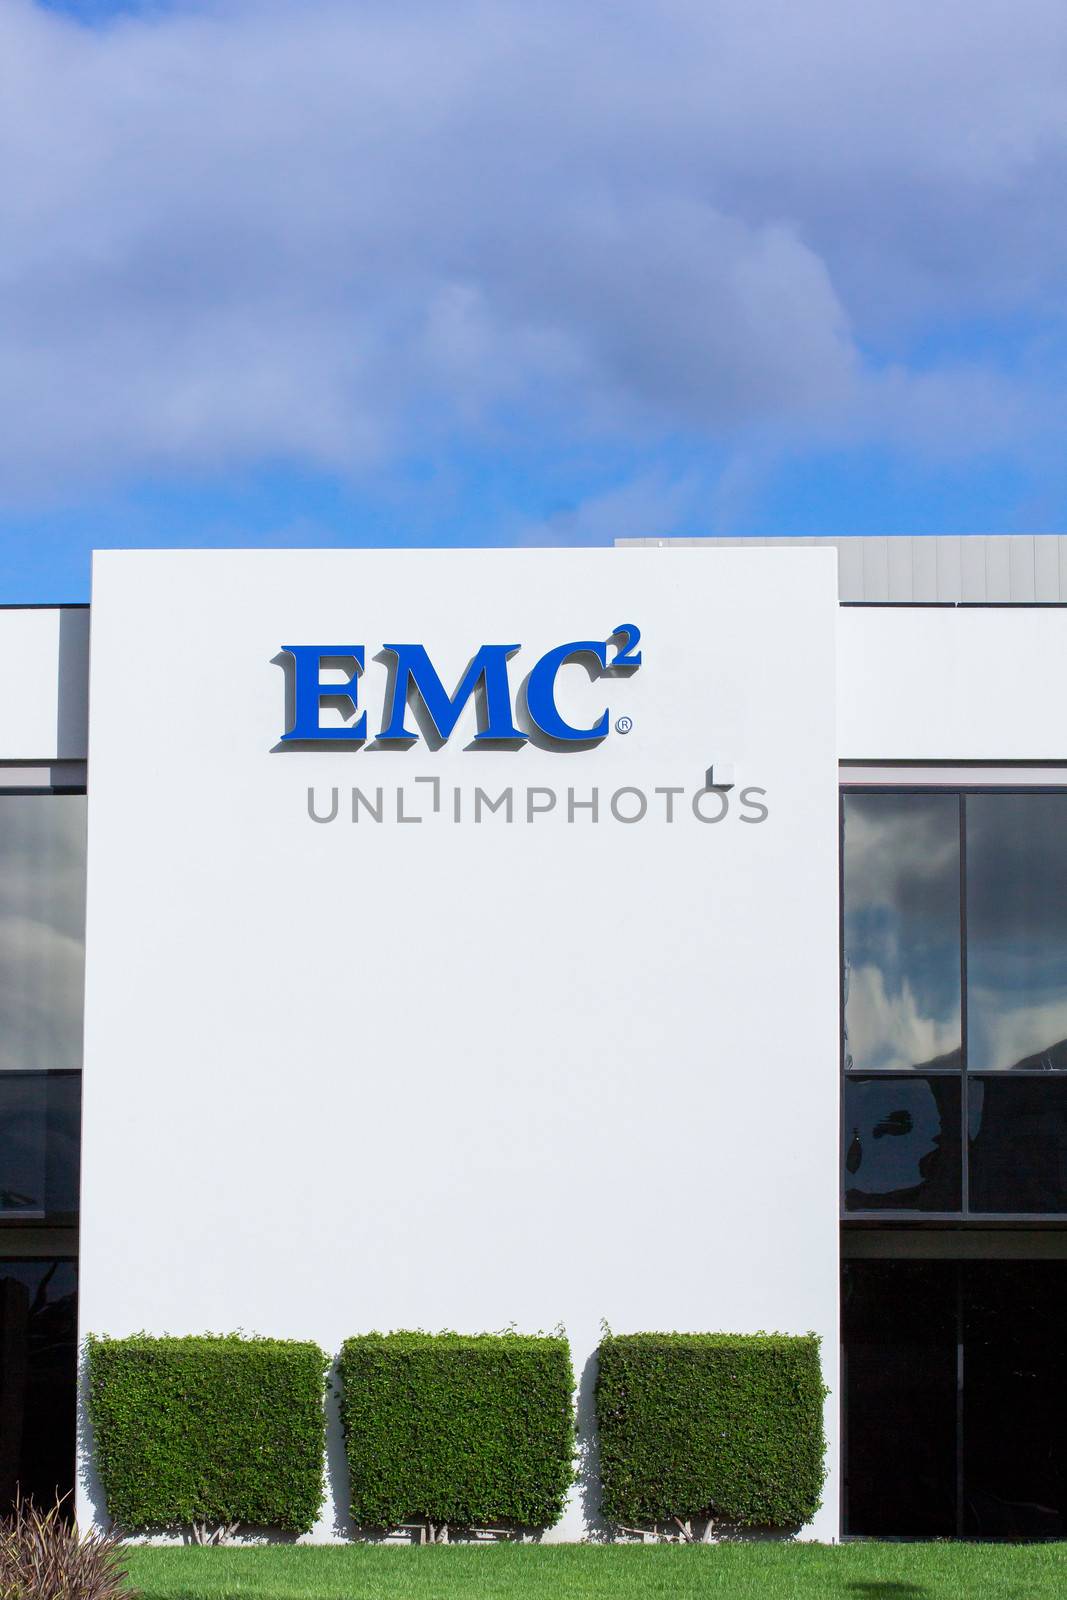 EMC Facility in Silicon Valley by wolterk